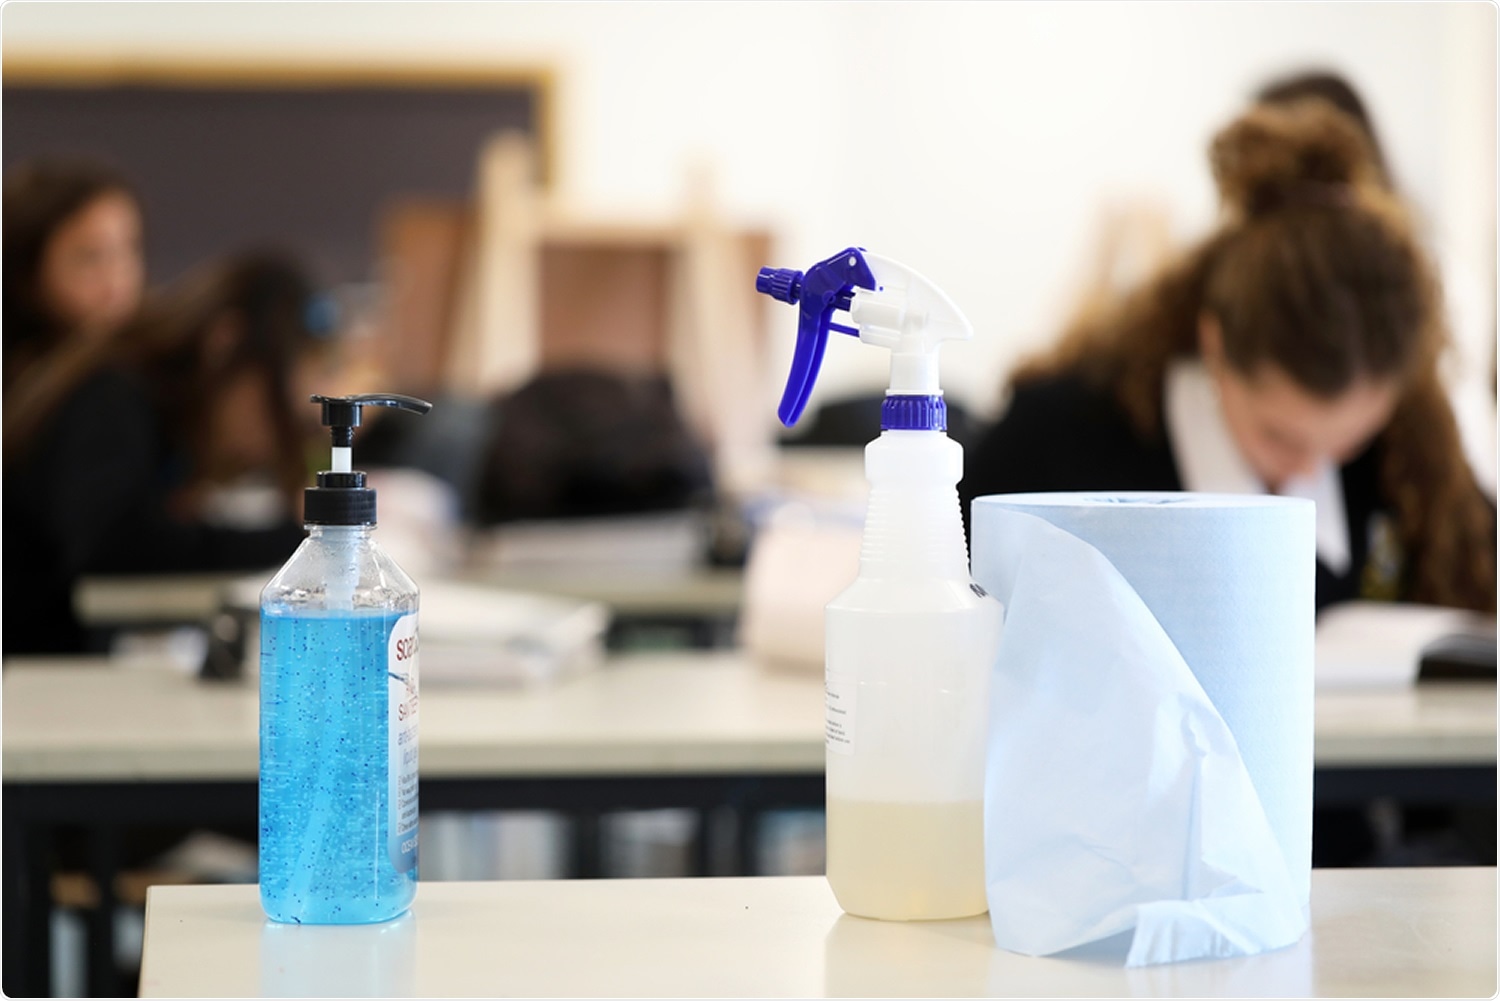 Study: The challenge of SARS-CoV-2 environmental monitoring in schools using floors and portable HEPA filtration units: Fresh or relic RNA?. Image Credit: LBeddoe / Shutterstock